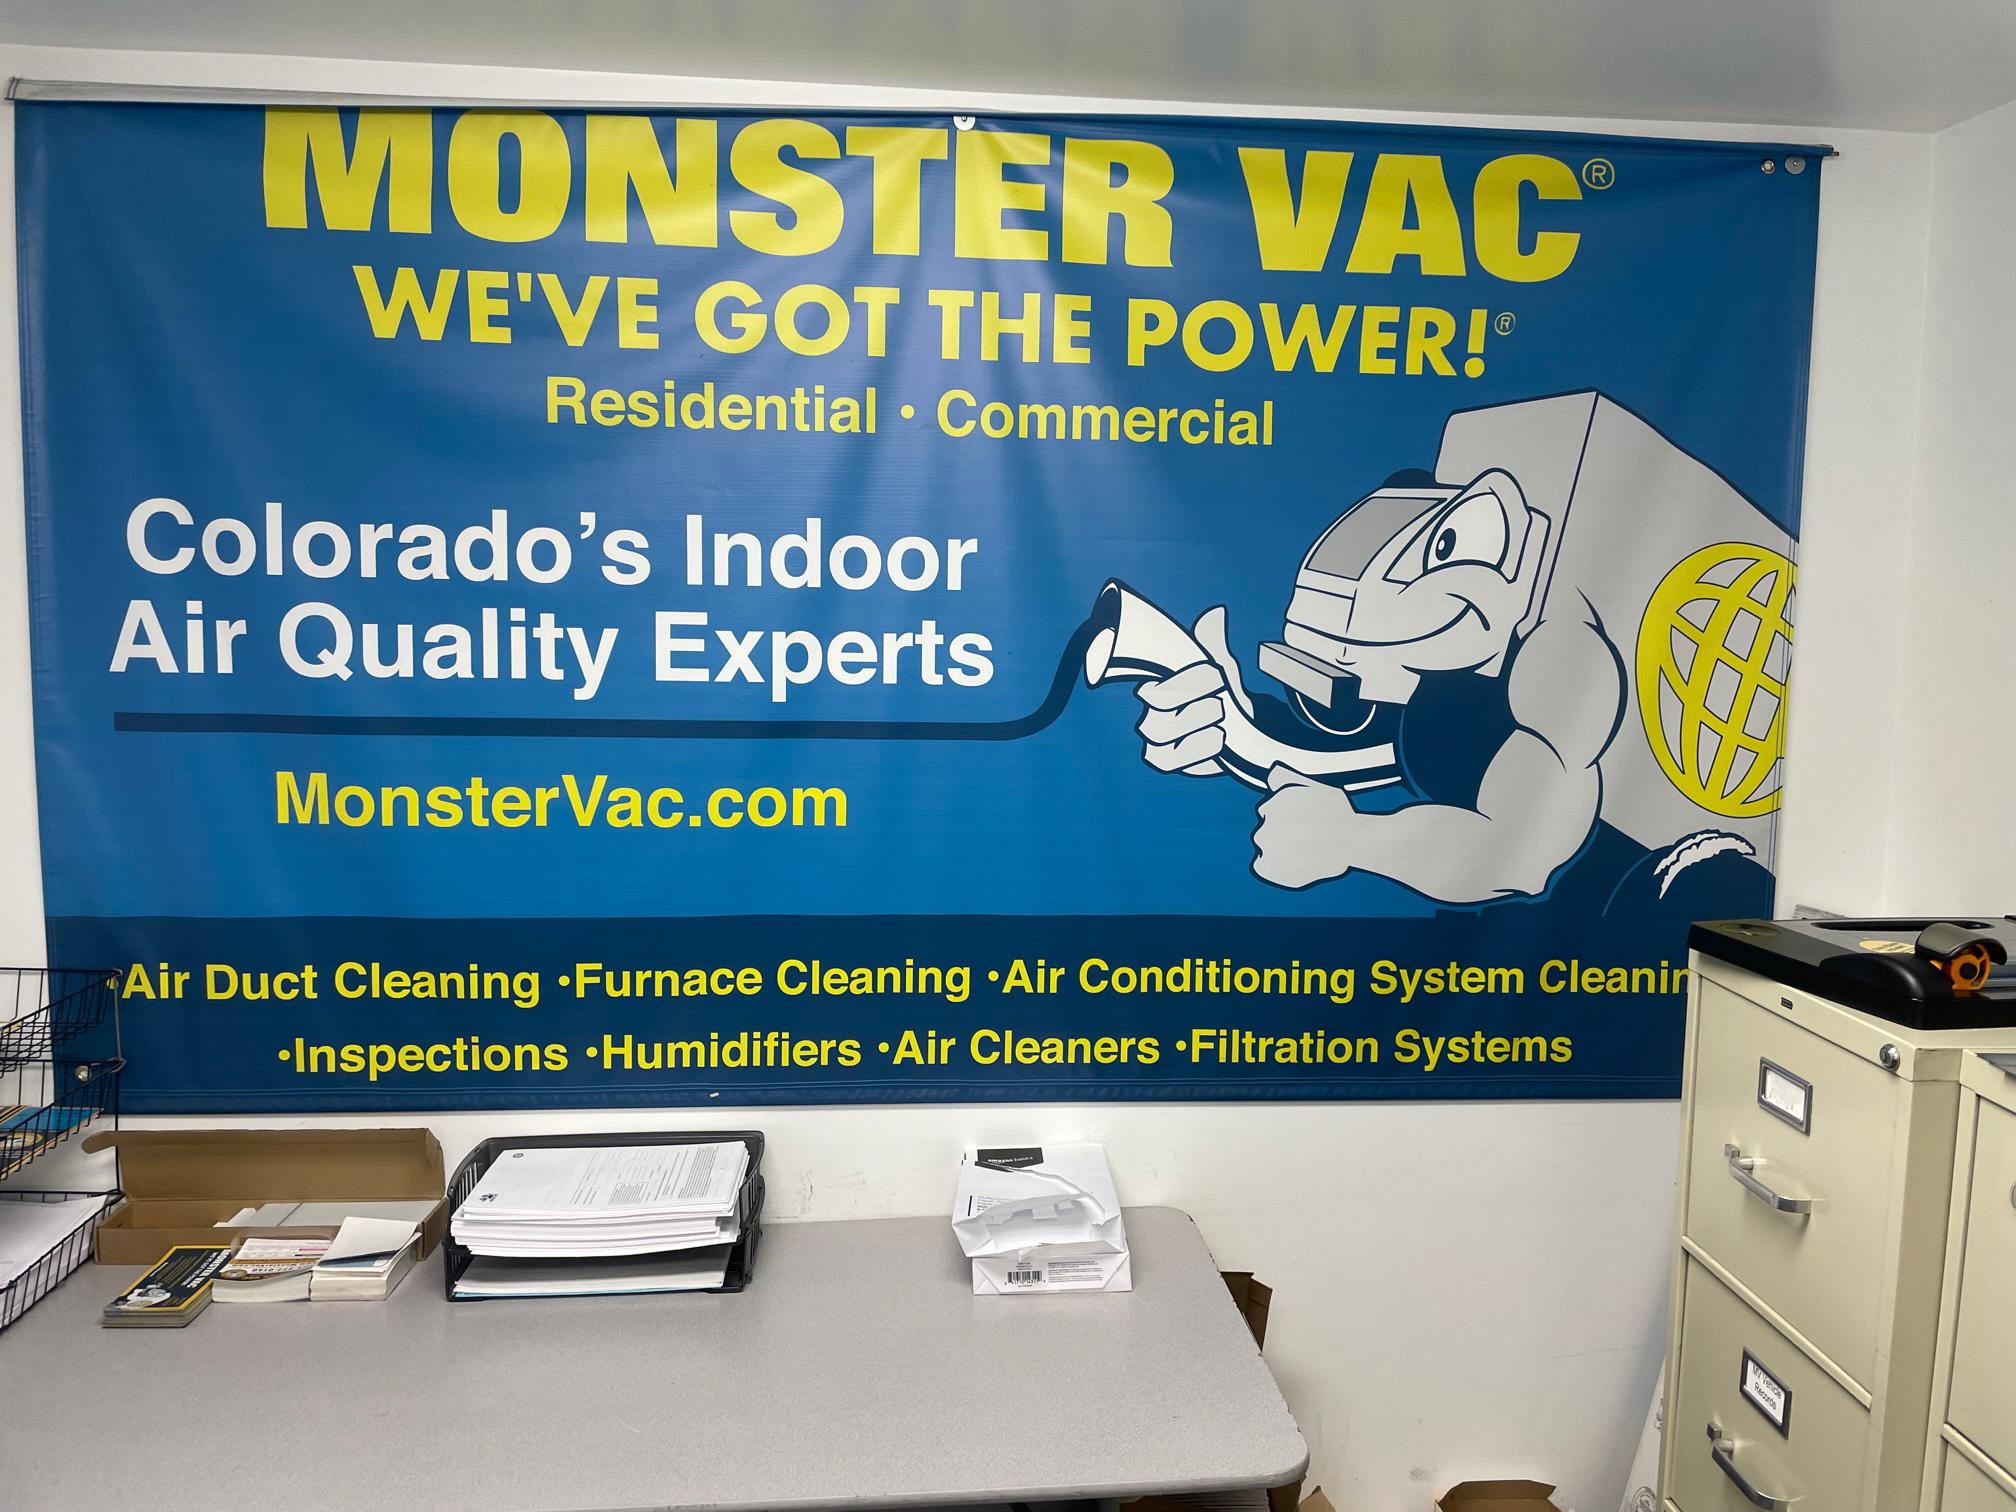 Monster Vac office and banner